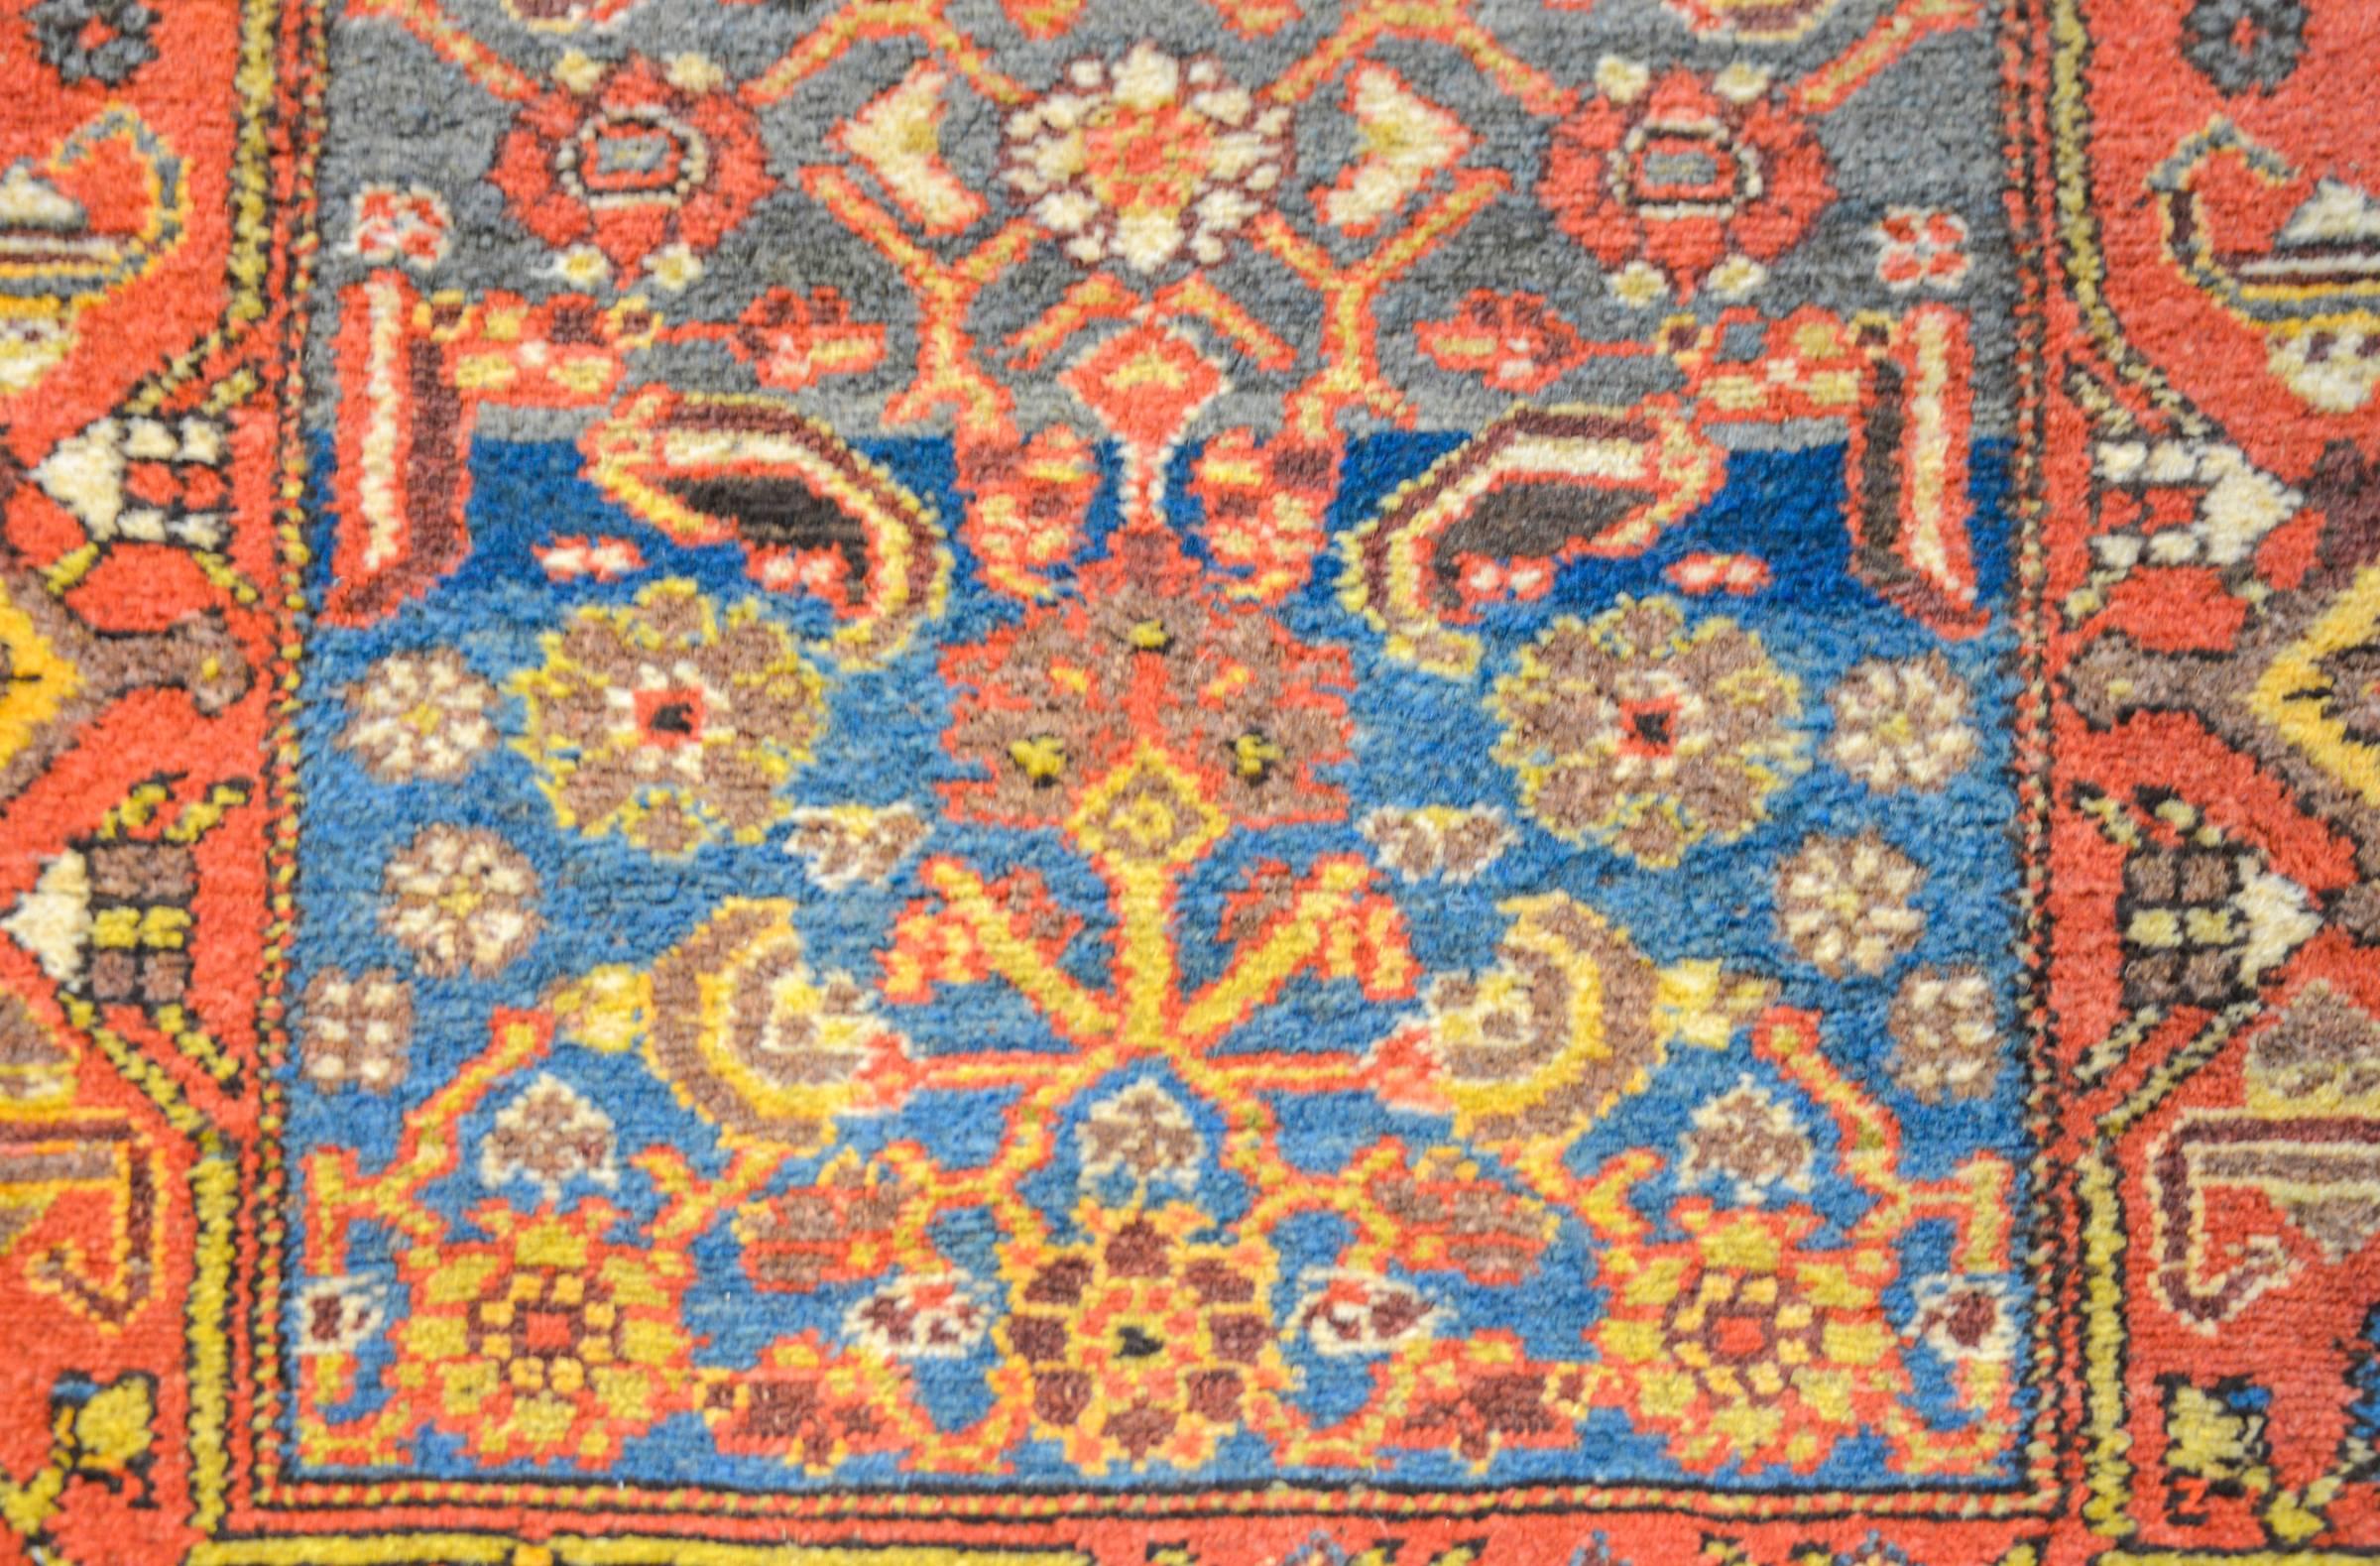 A stunning early 20th century Persian Kurdish rug with a plush pile and a striking indigo abrash field woven with an all-over gold, orange, and crimson floral and paisley pattern. The border is wide with an exceptional geometric and stylized vine